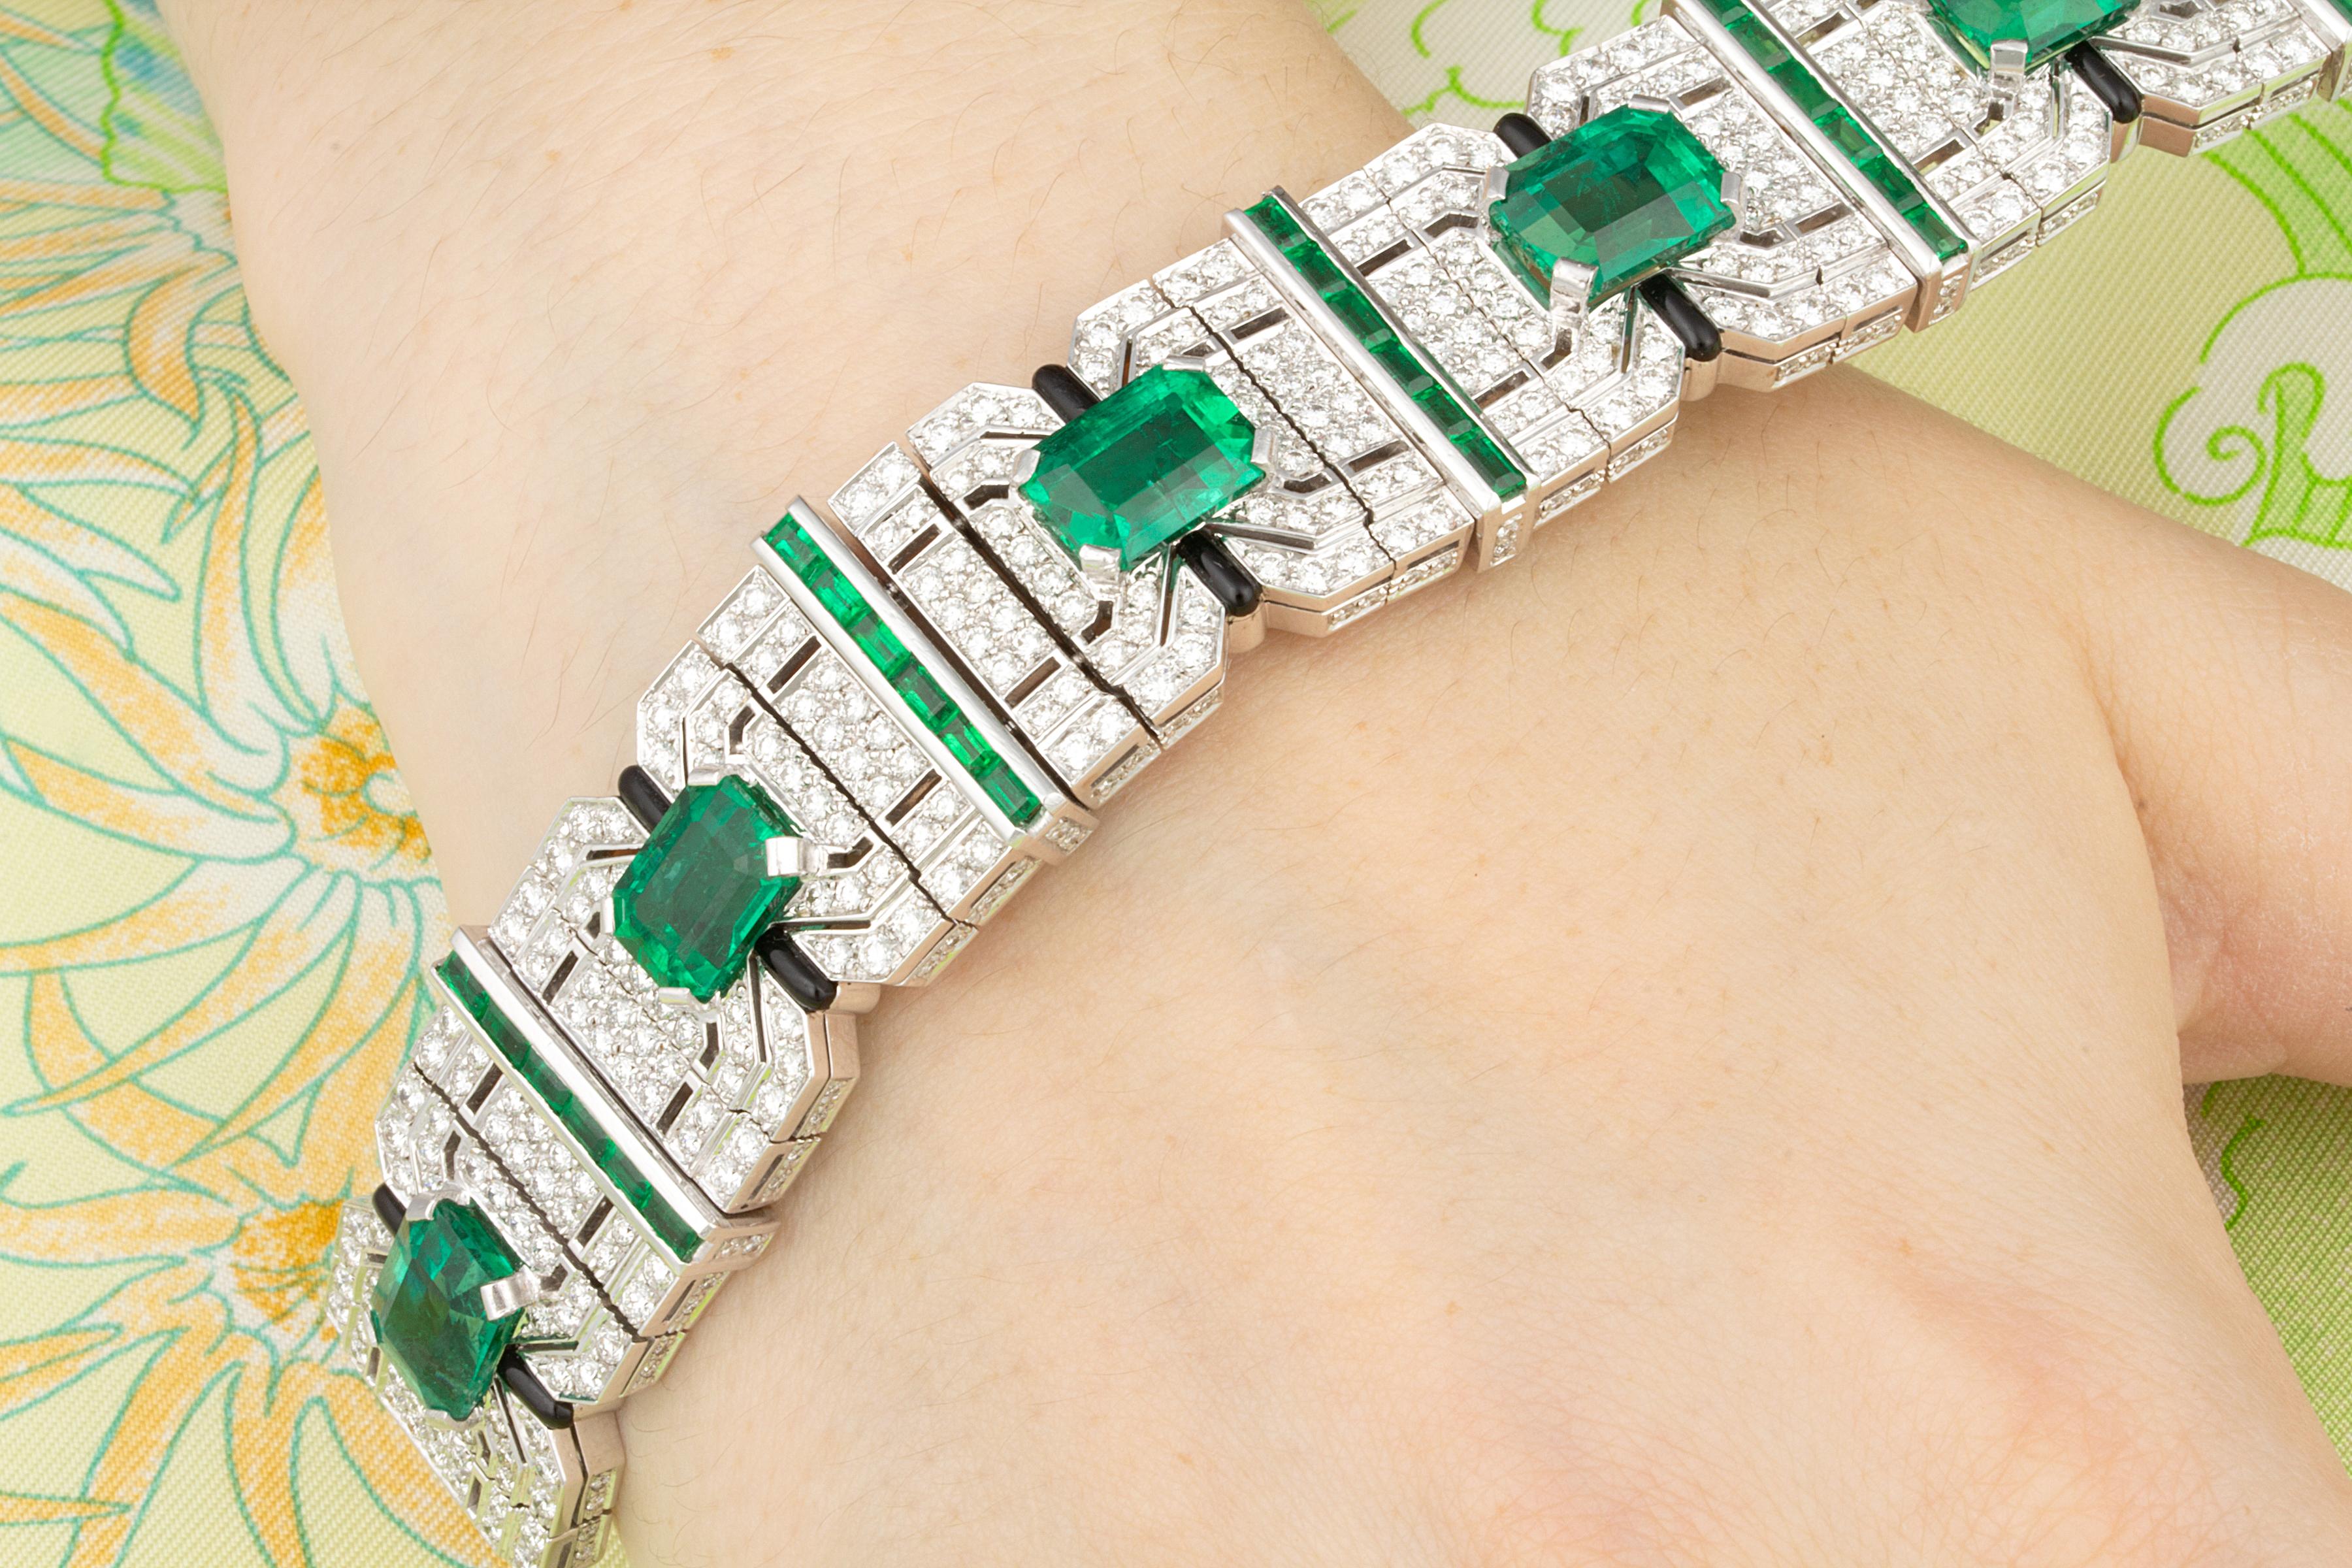 This art déco style emerald and diamond cuff bracelet features 7 magnificent emerald cut emeralds of Zambian origin for a total of 23.63 carats. They show what may be called a perfect emerald color, neither dark tending to blue, nor light tending to